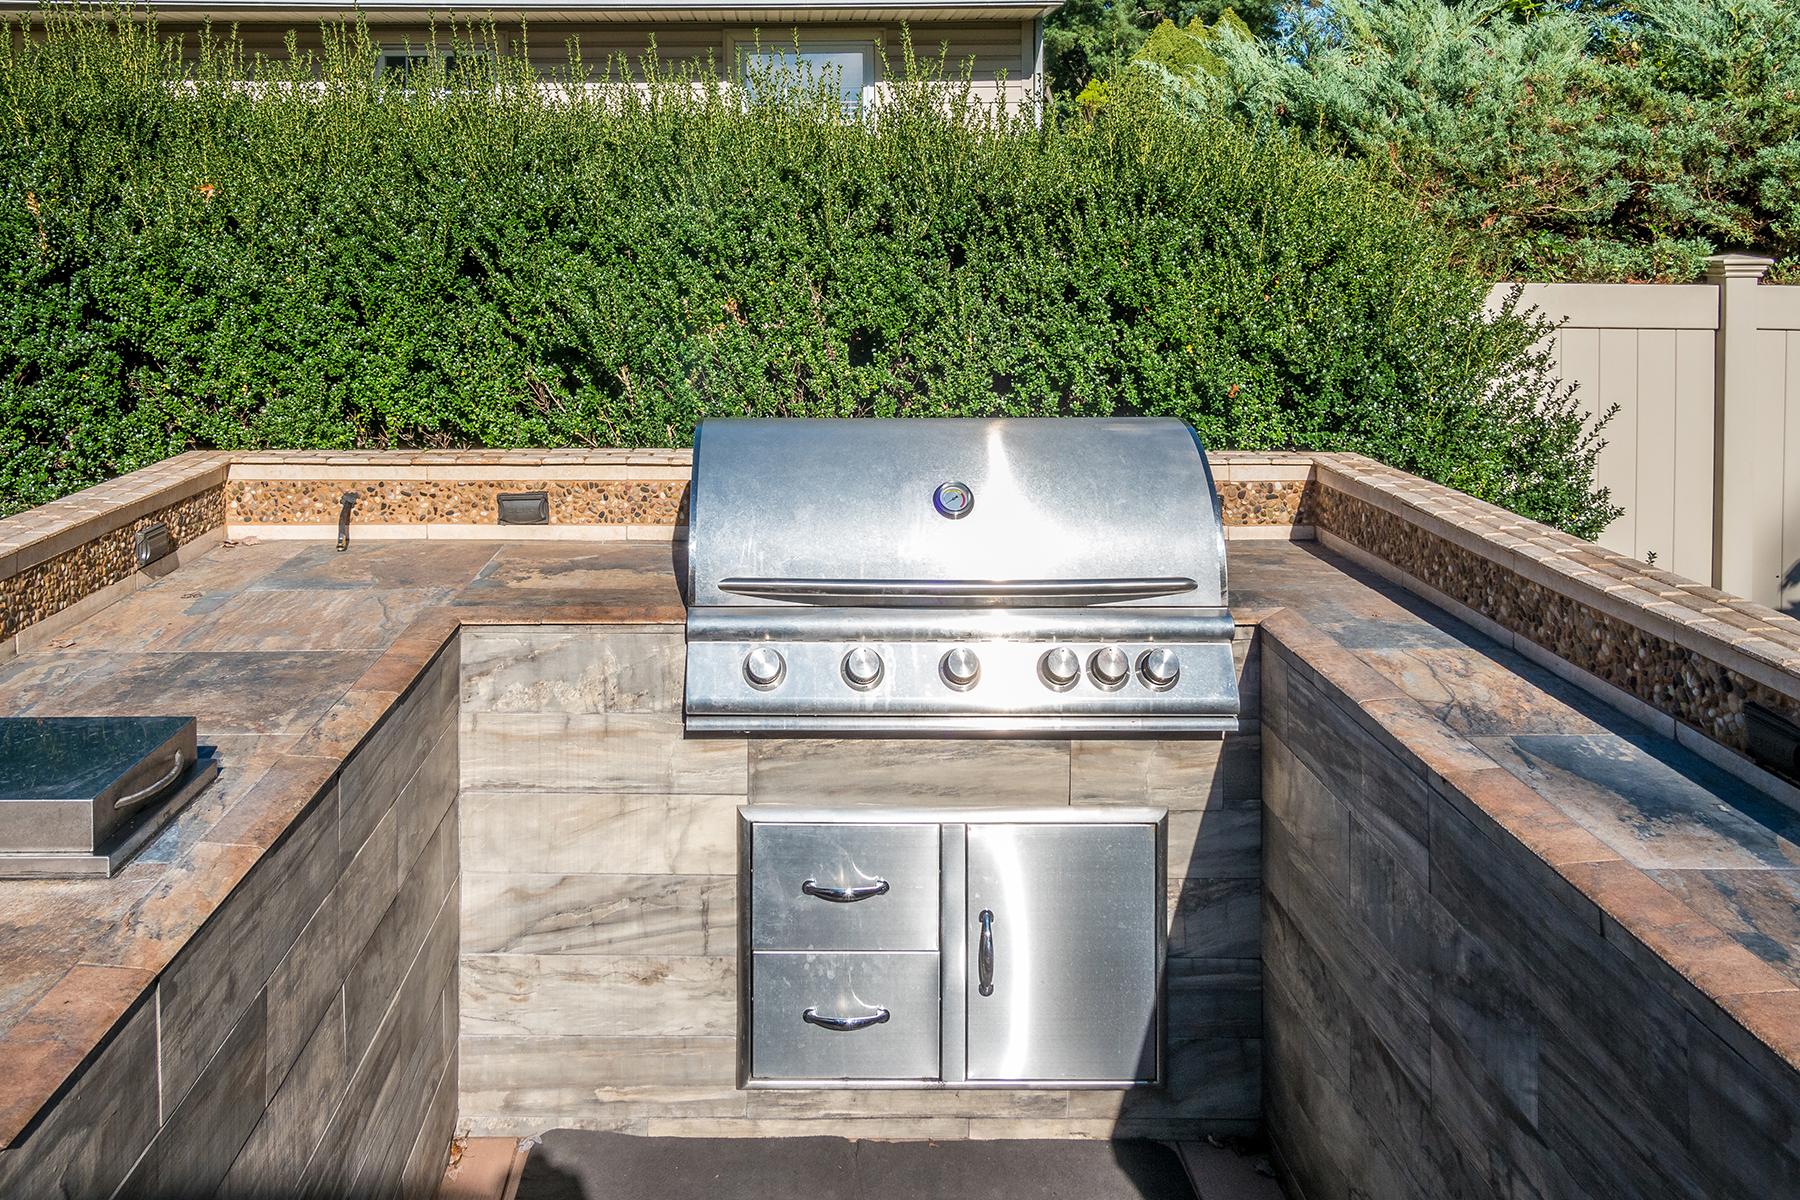 Built-in grill at the private deck